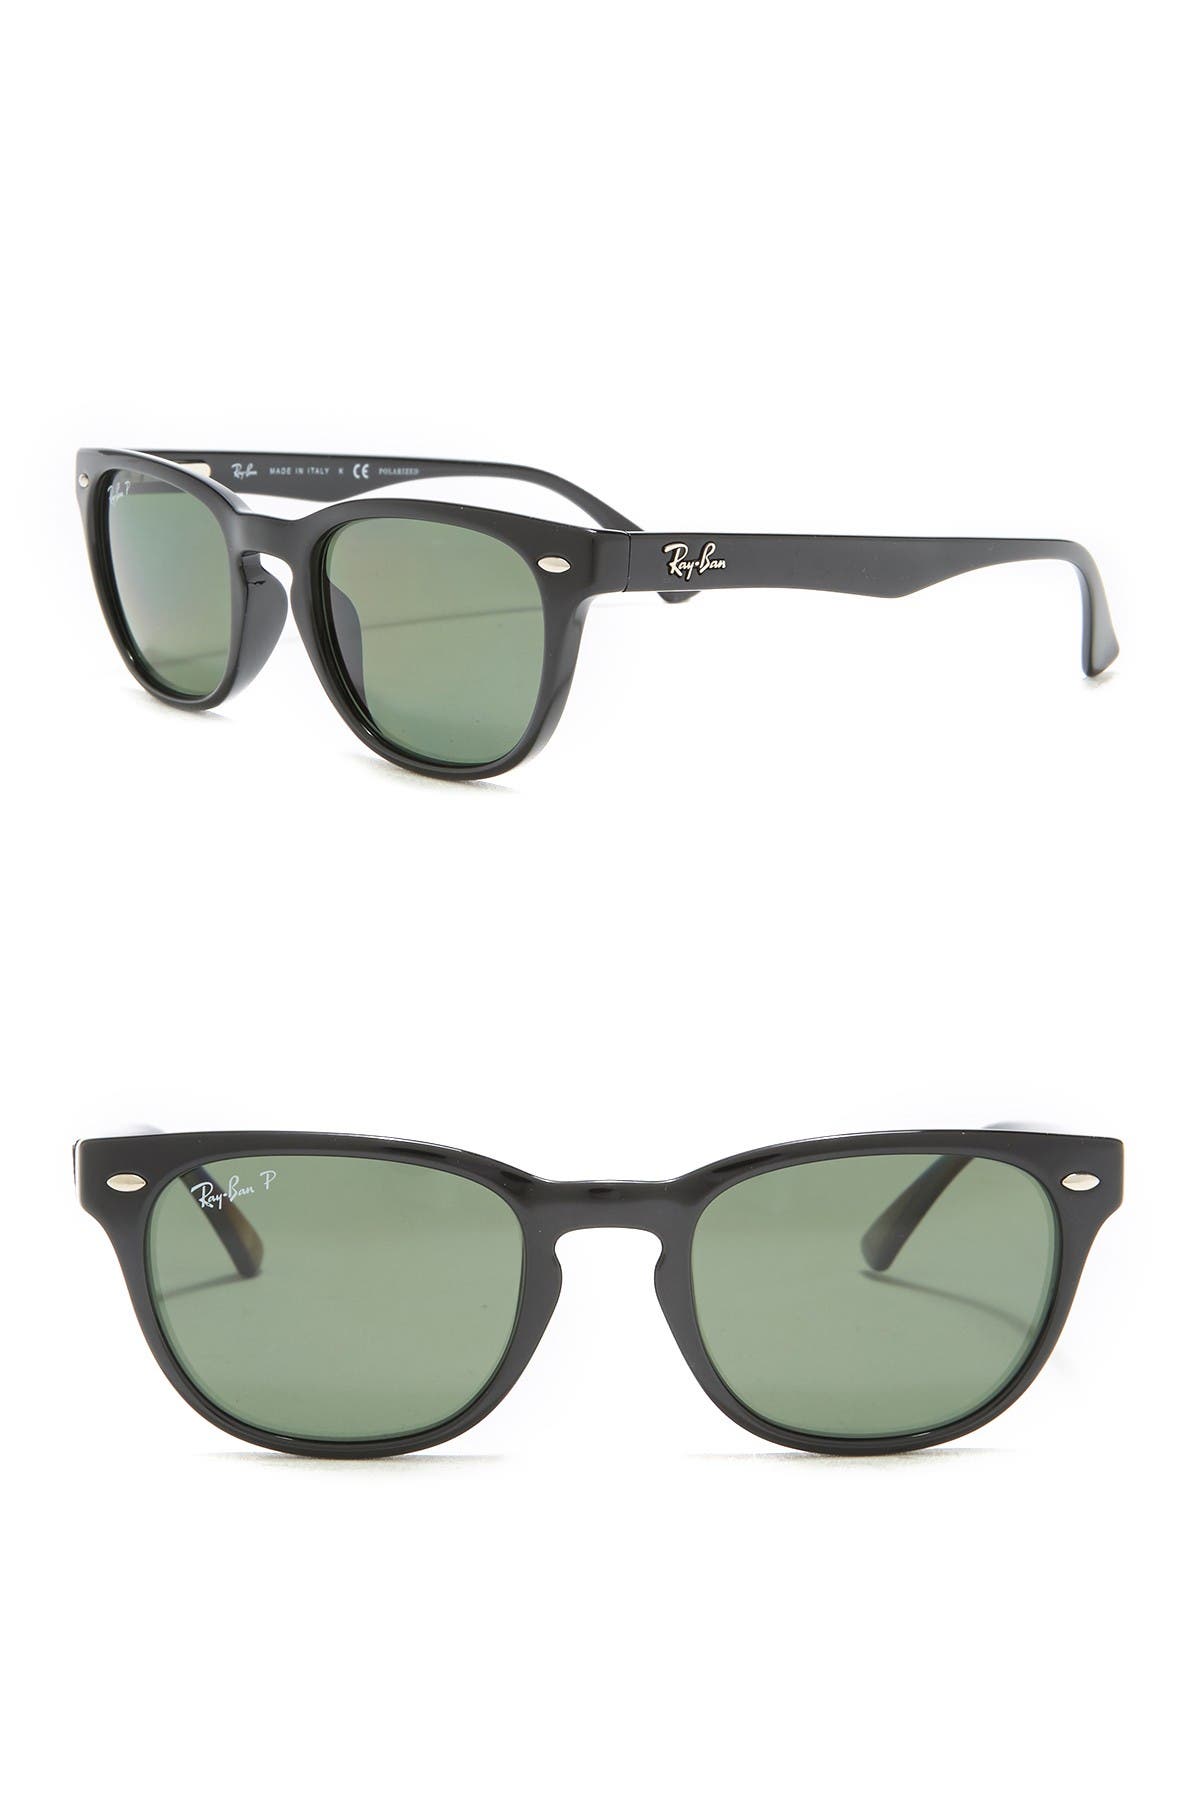 what is the p on ray ban sunglasses